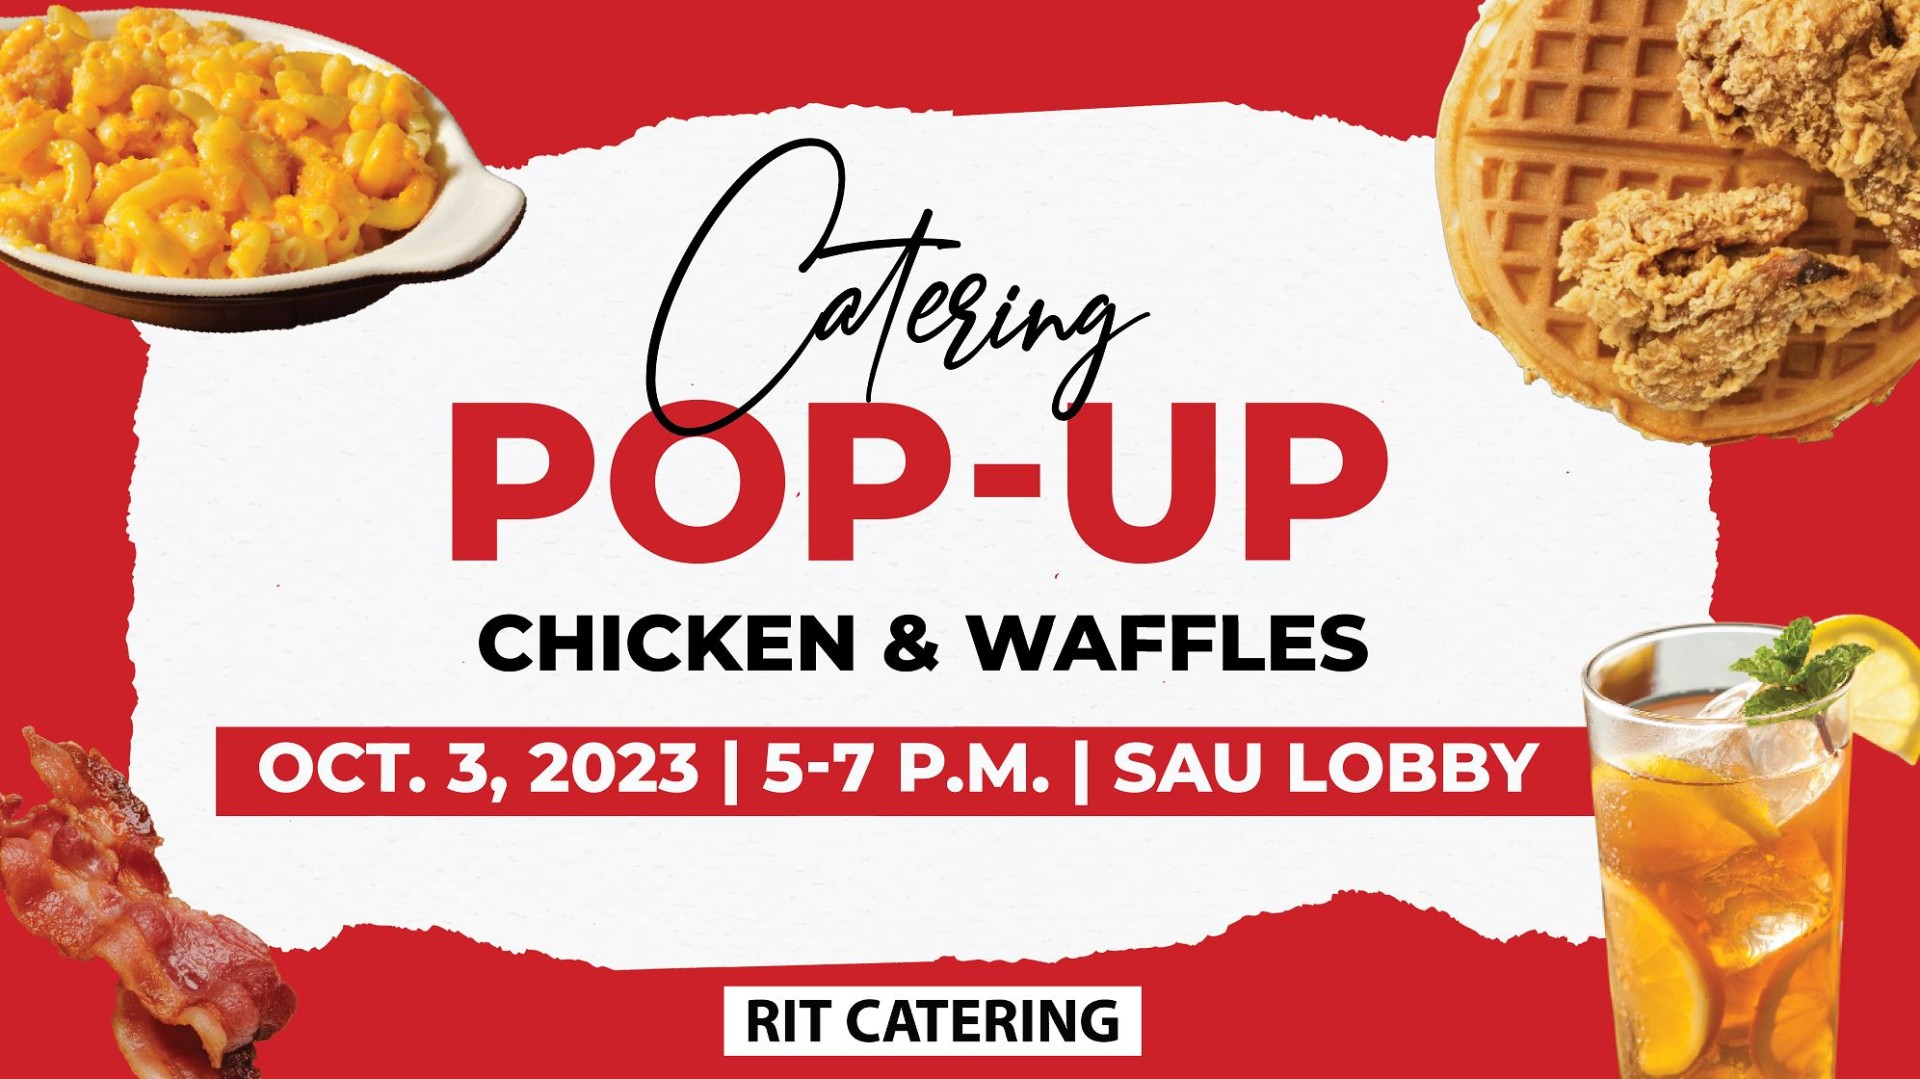 Chicken and Waffles, Oct. 3, 5-7 p.m. 